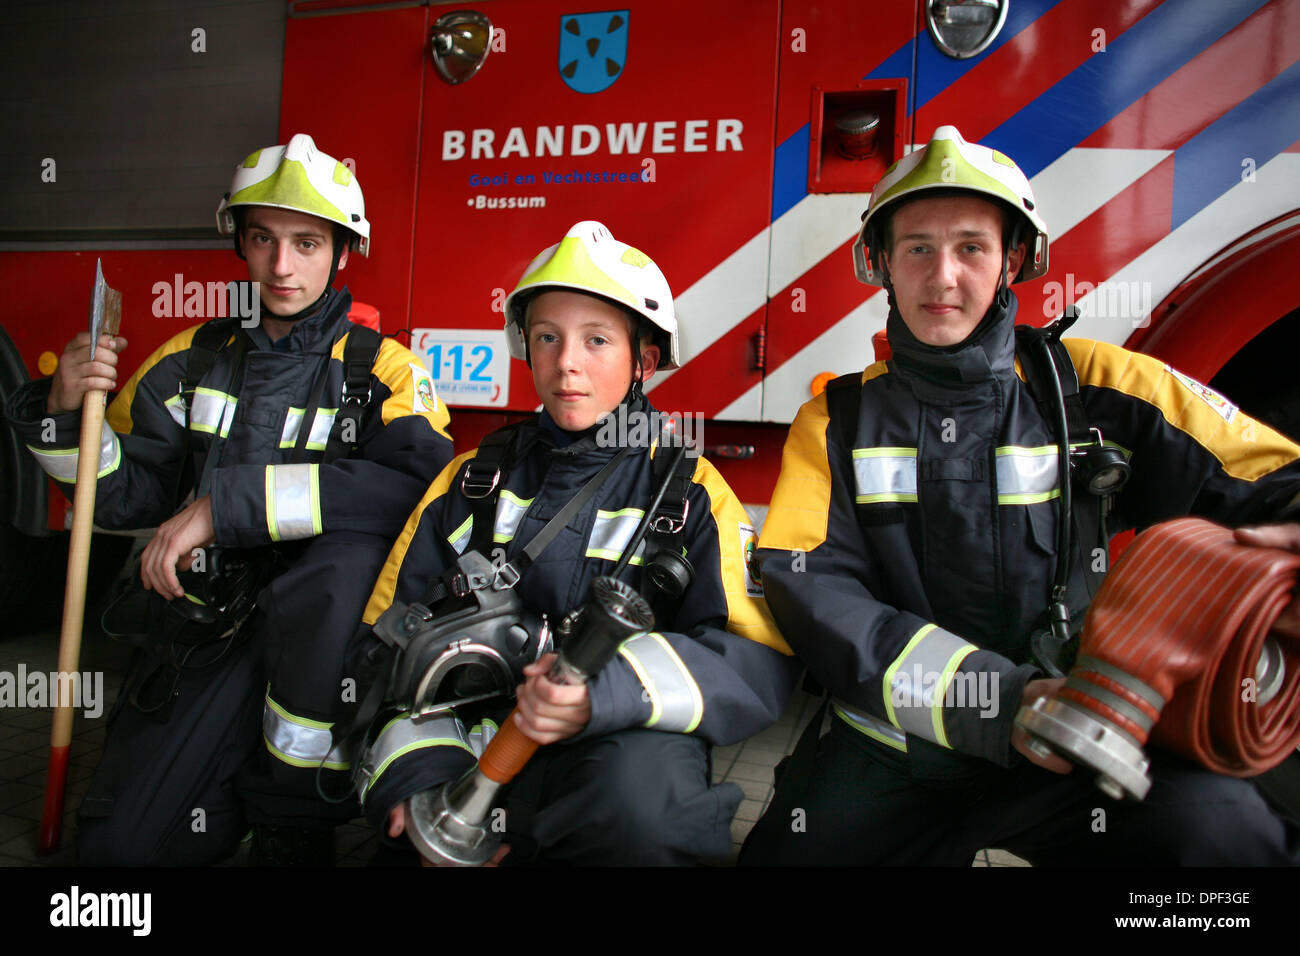 Dec 21, 2006 - Leiden, Netherlands - Firefighters (historically, firemen) are rescuers extensively trained primarily to put out hazardous fires that threaten civilian populations and property, to rescue people from car incidents, collapsed and burning buildings and other such situations. The increasing complexity of modern industrialized life with an increase in the scale of hazard Stock Photo